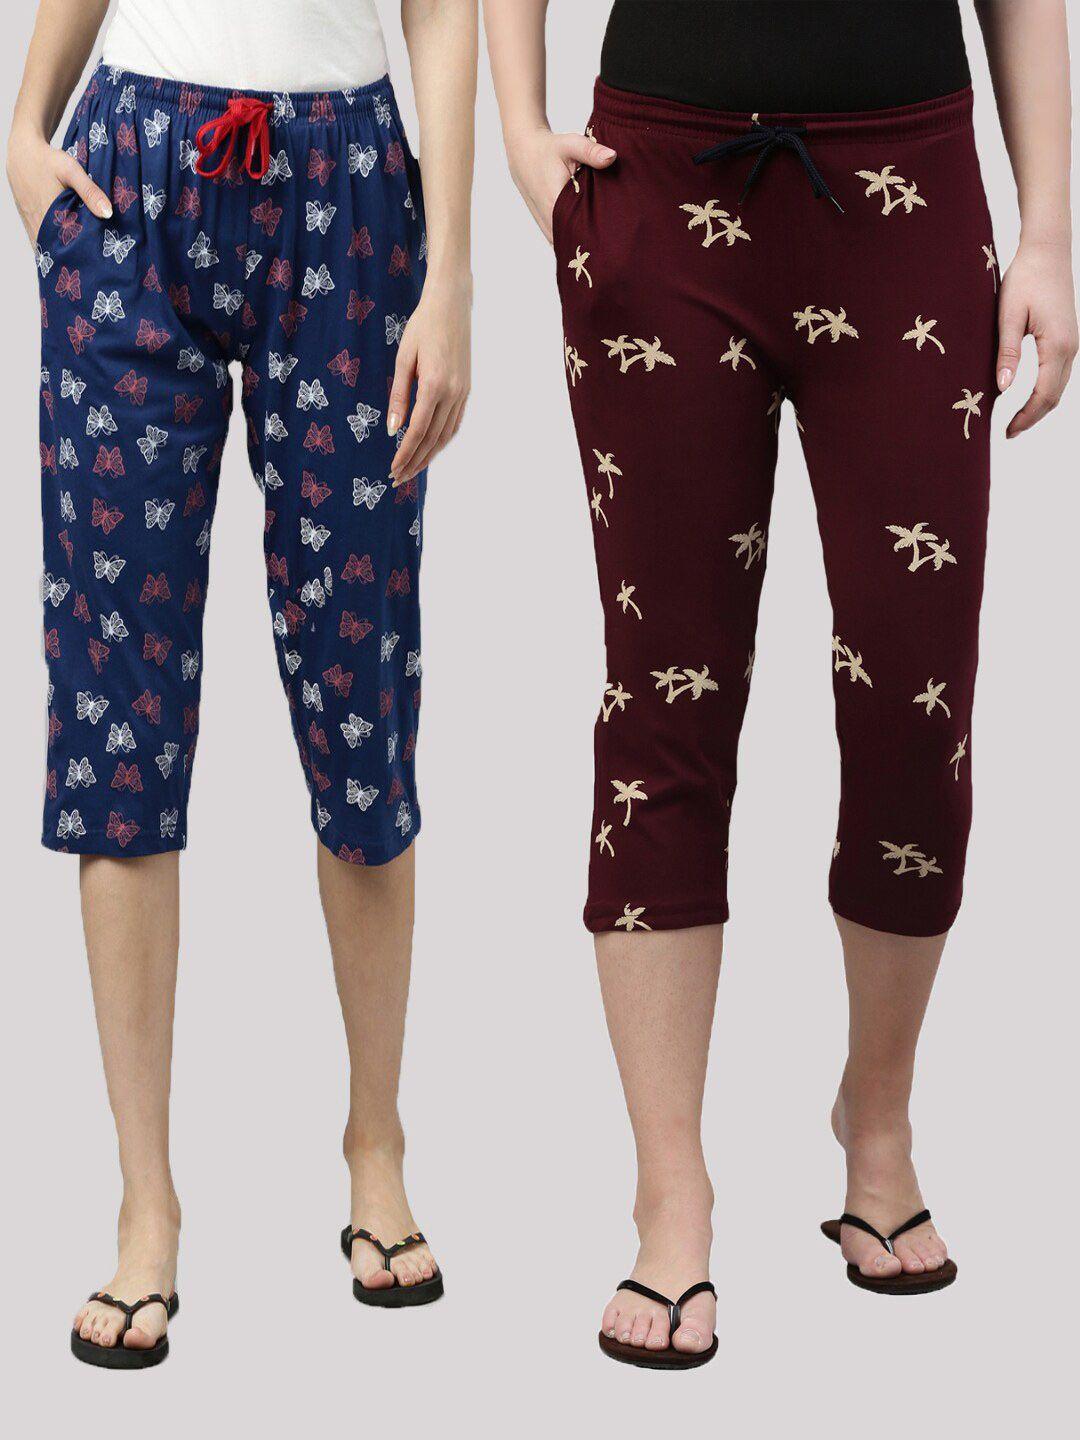 kryptic women pack of 2 navy blue & maroon printed pure cotton capris